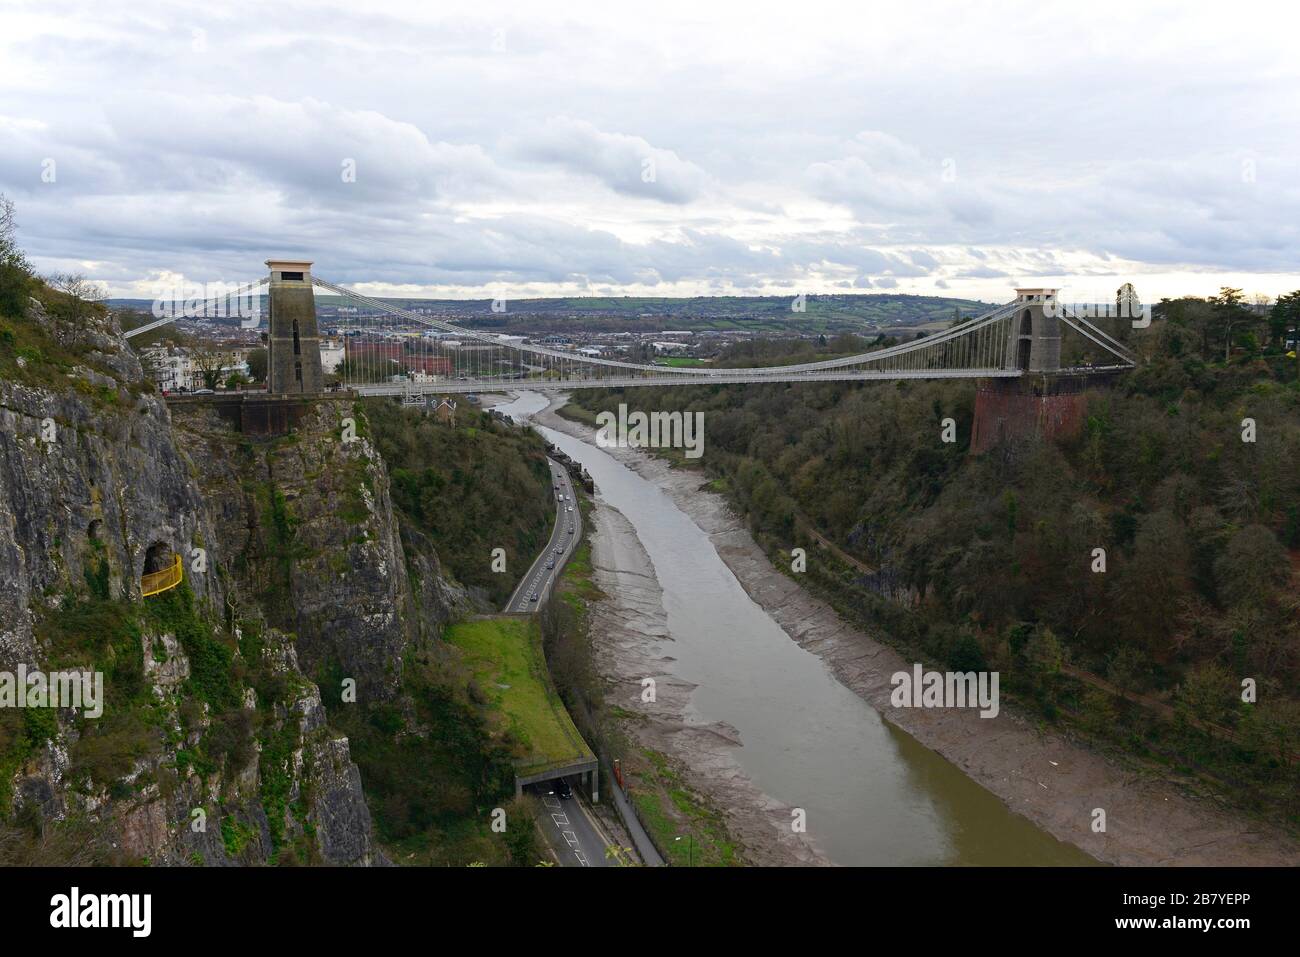 Brunel's Clifton Suspension Bridge on a cloudy day at low tide, Clifton, Bristol, UK, with the gallery rock shelter over the Portway road below Stock Photo